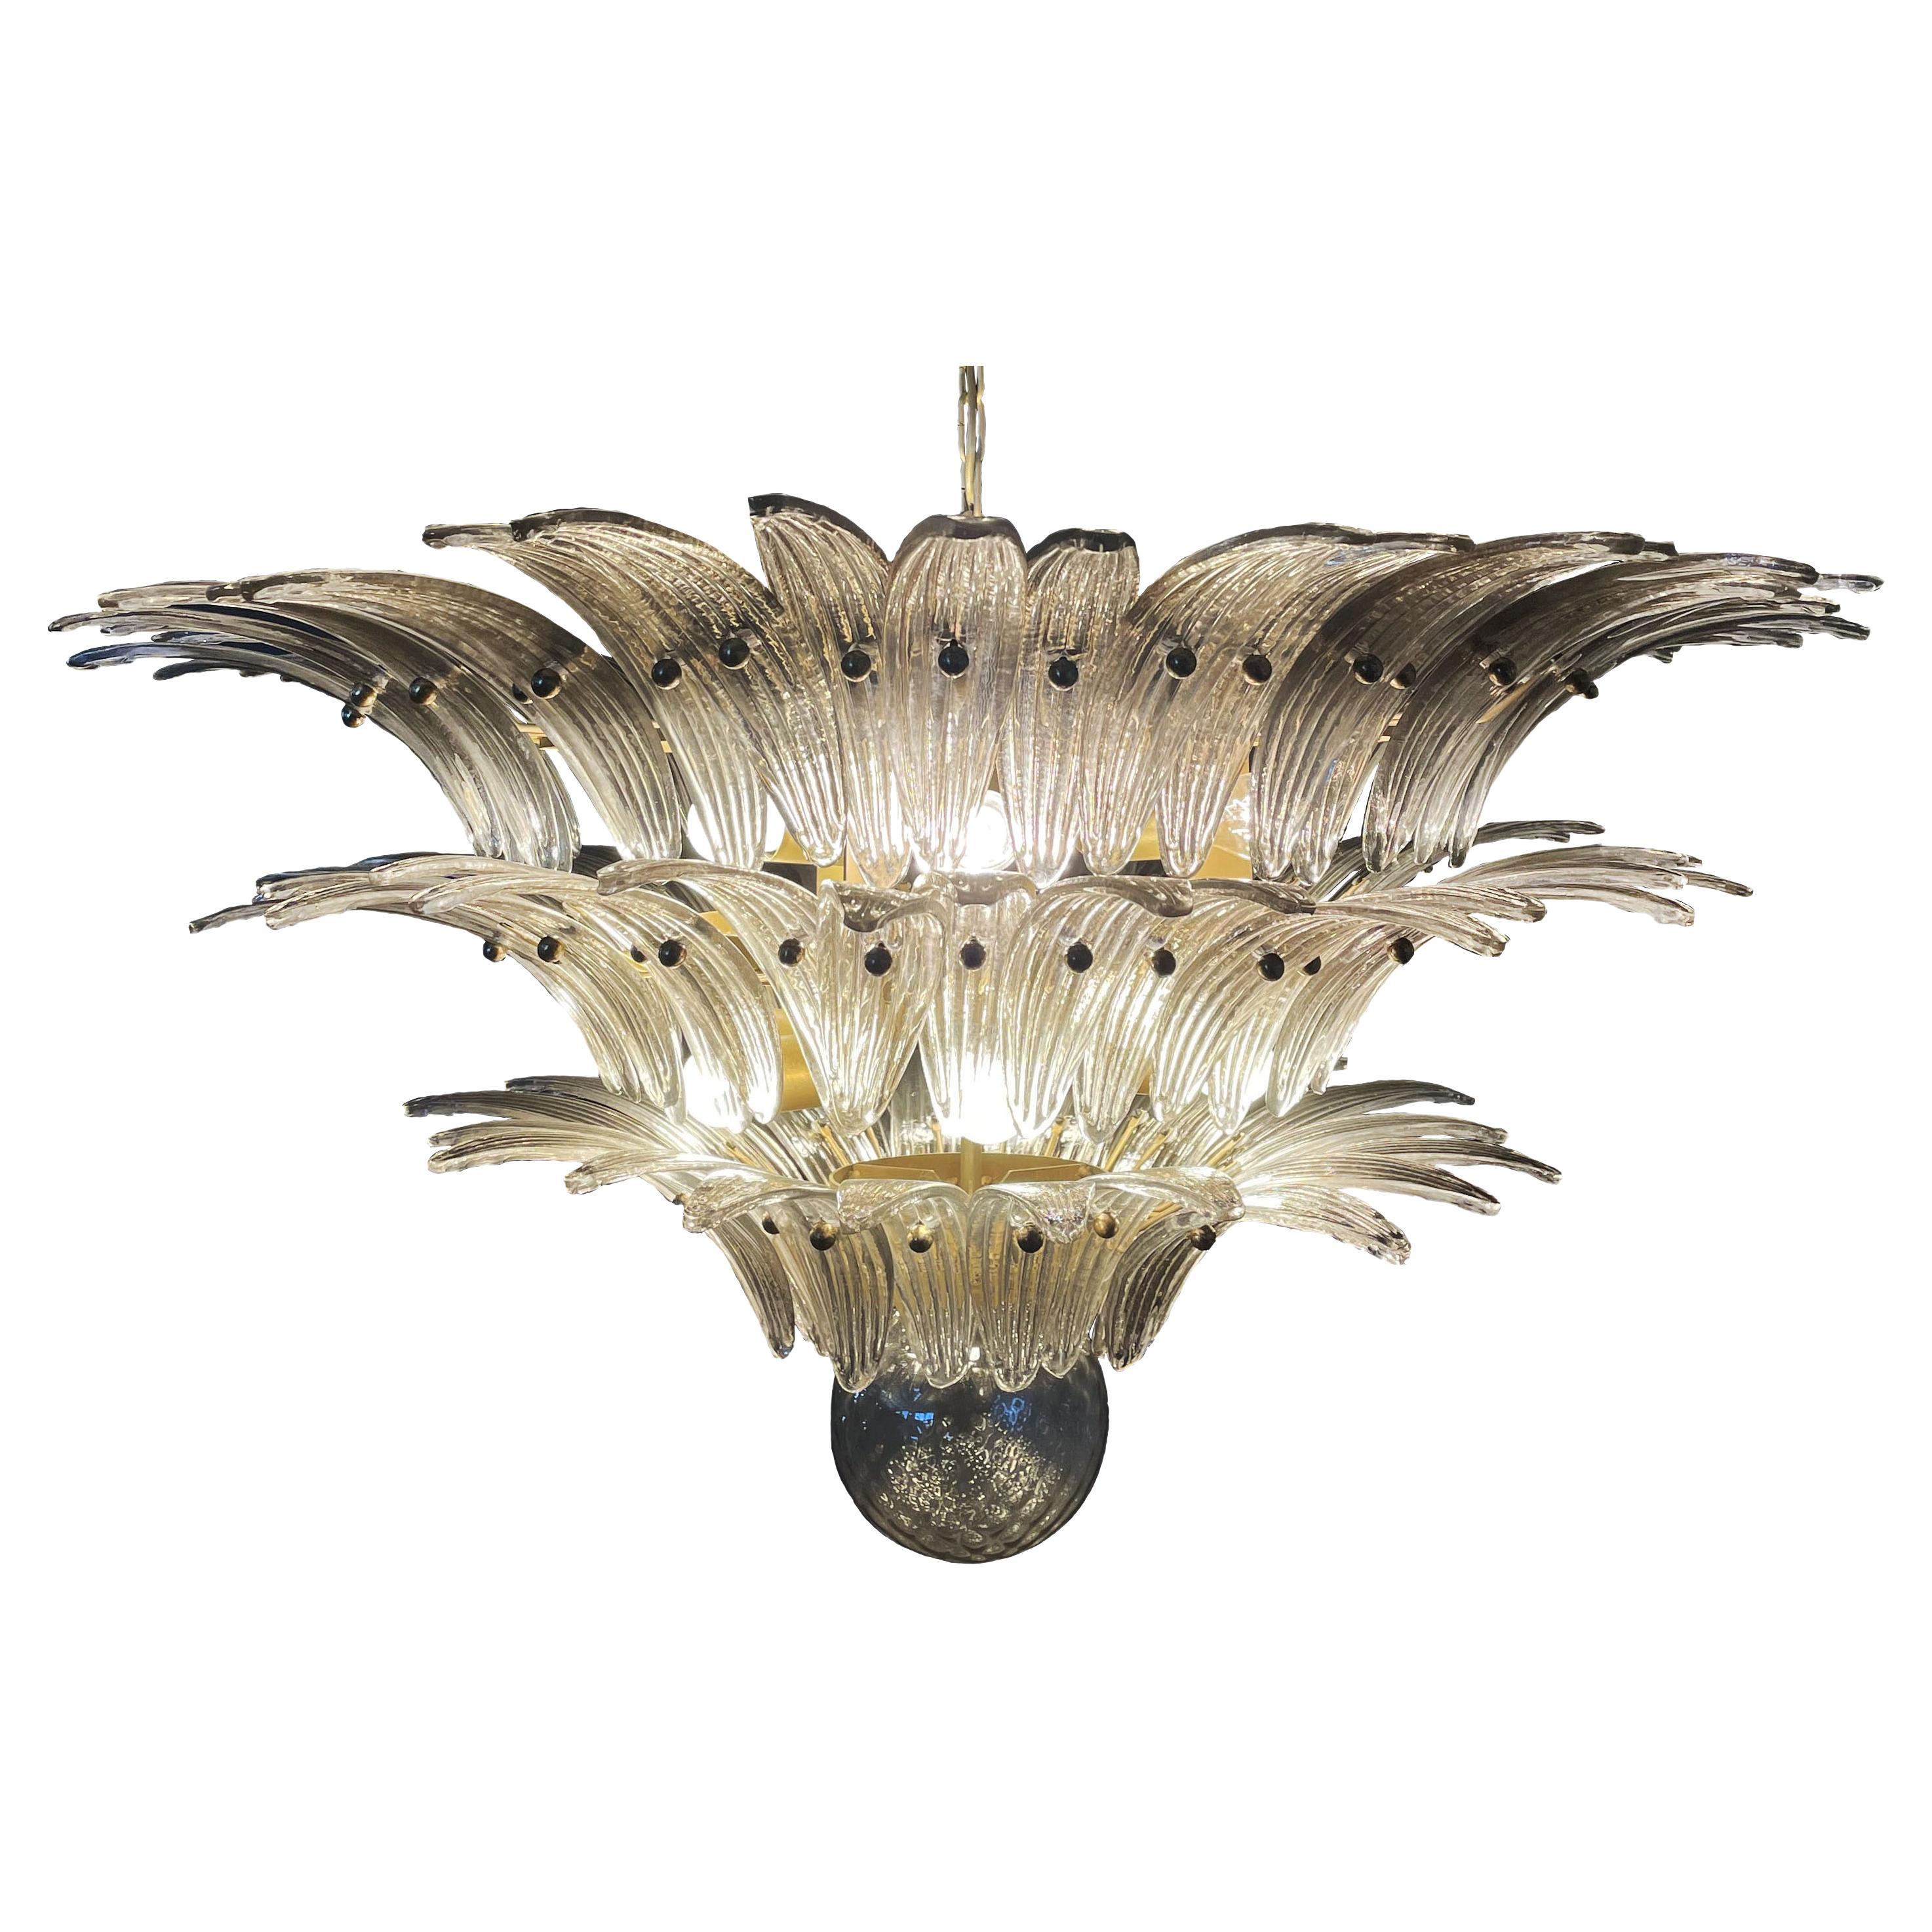 Beautiful Palmette Ceiling Light, Three Levels, 104 Smoked Glasses For Sale